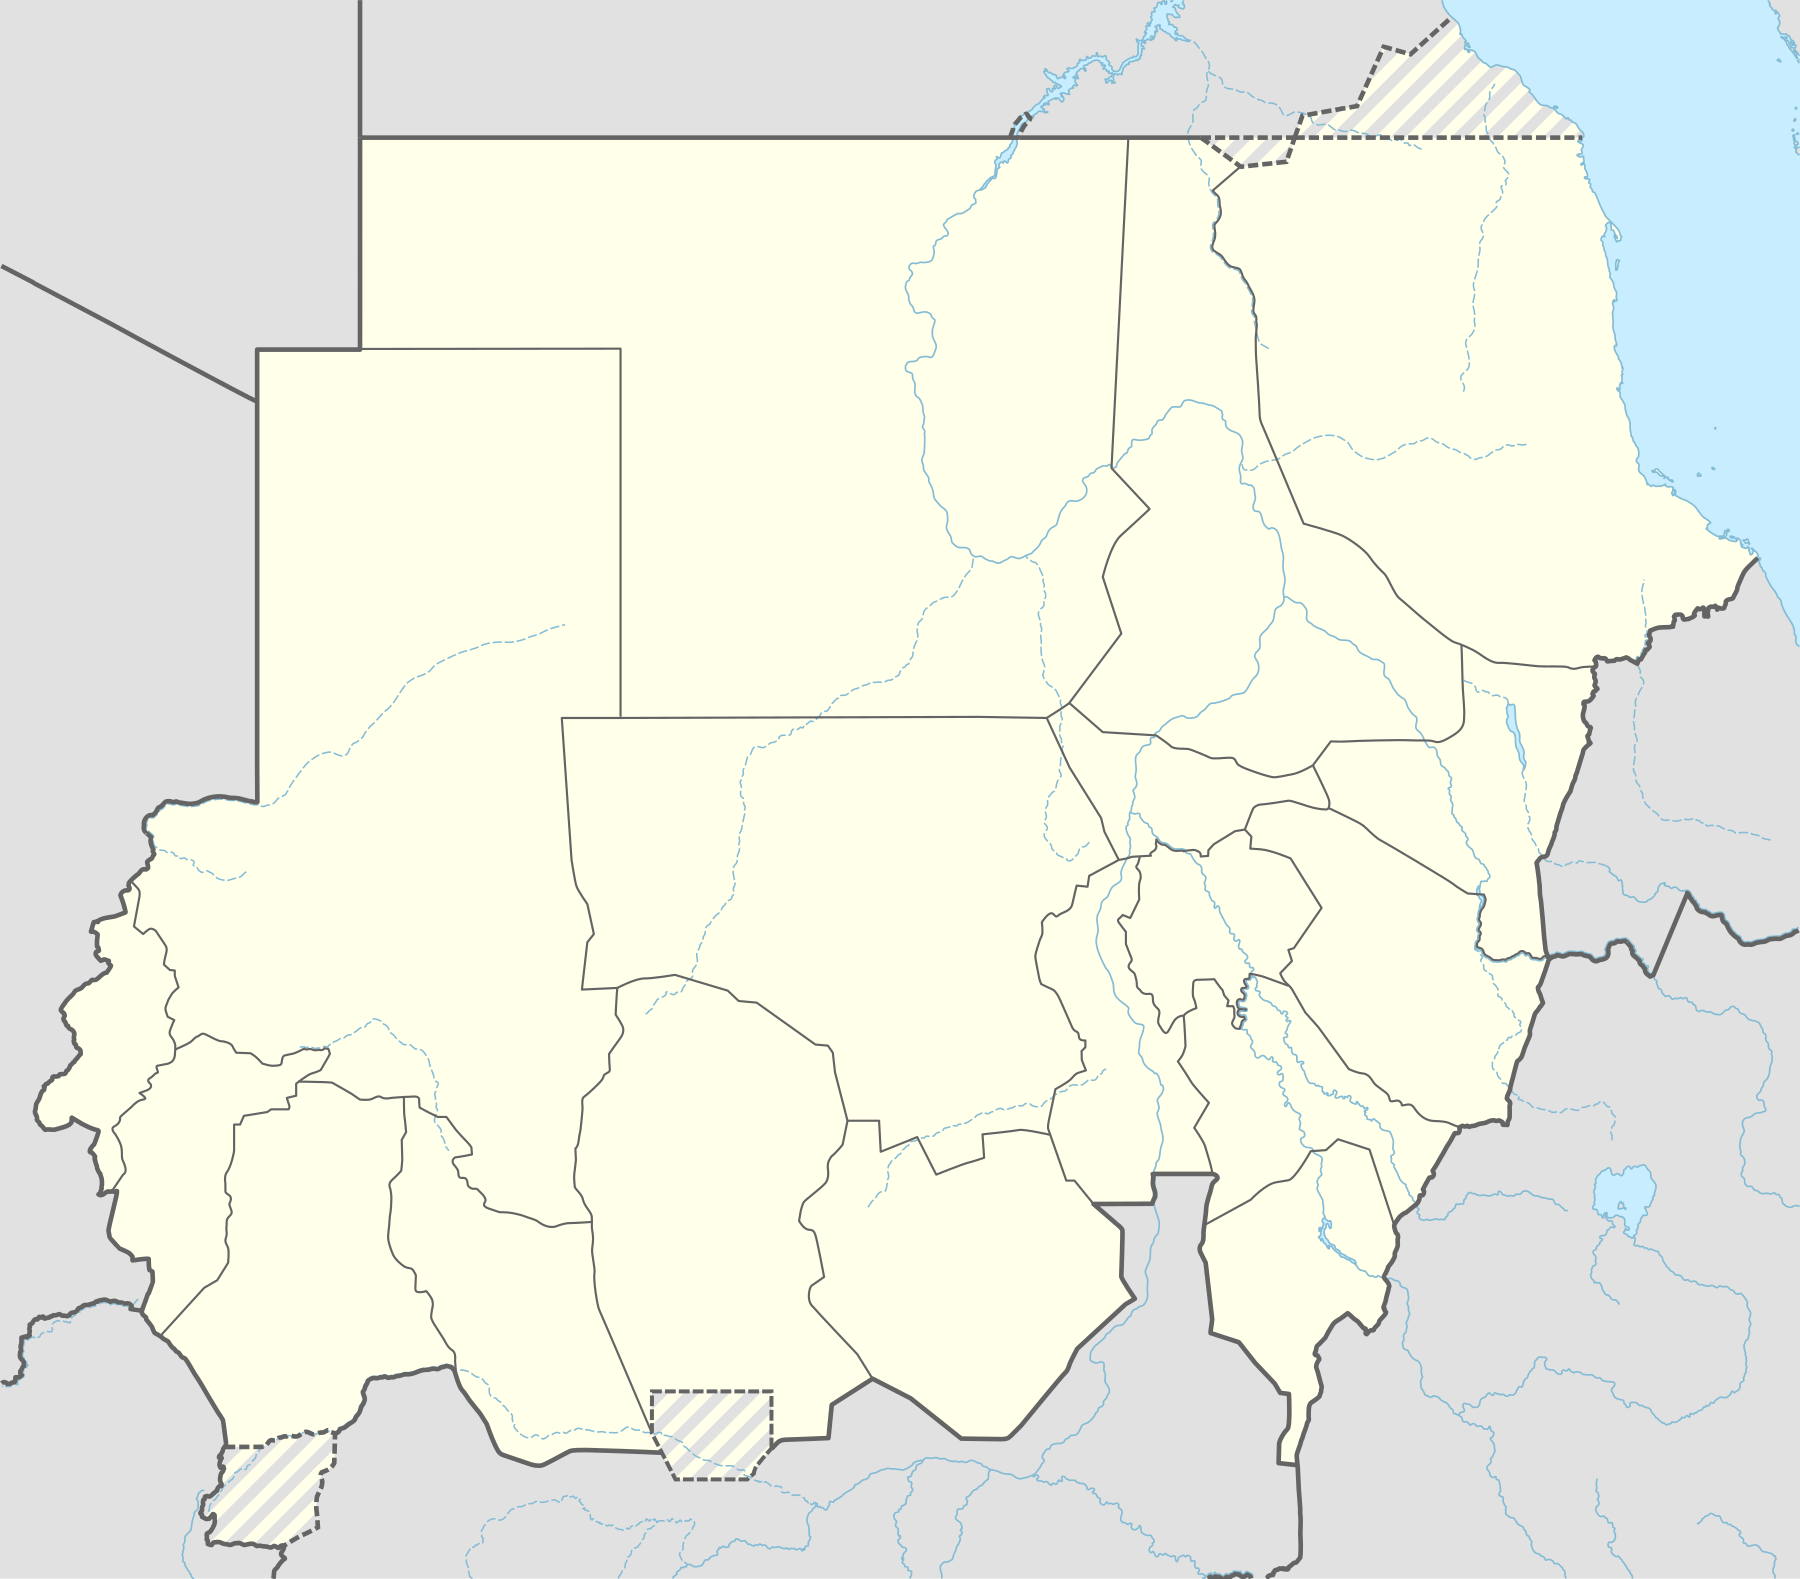 Sudanese Internal Conflict detailed map/doc is located in Sudan